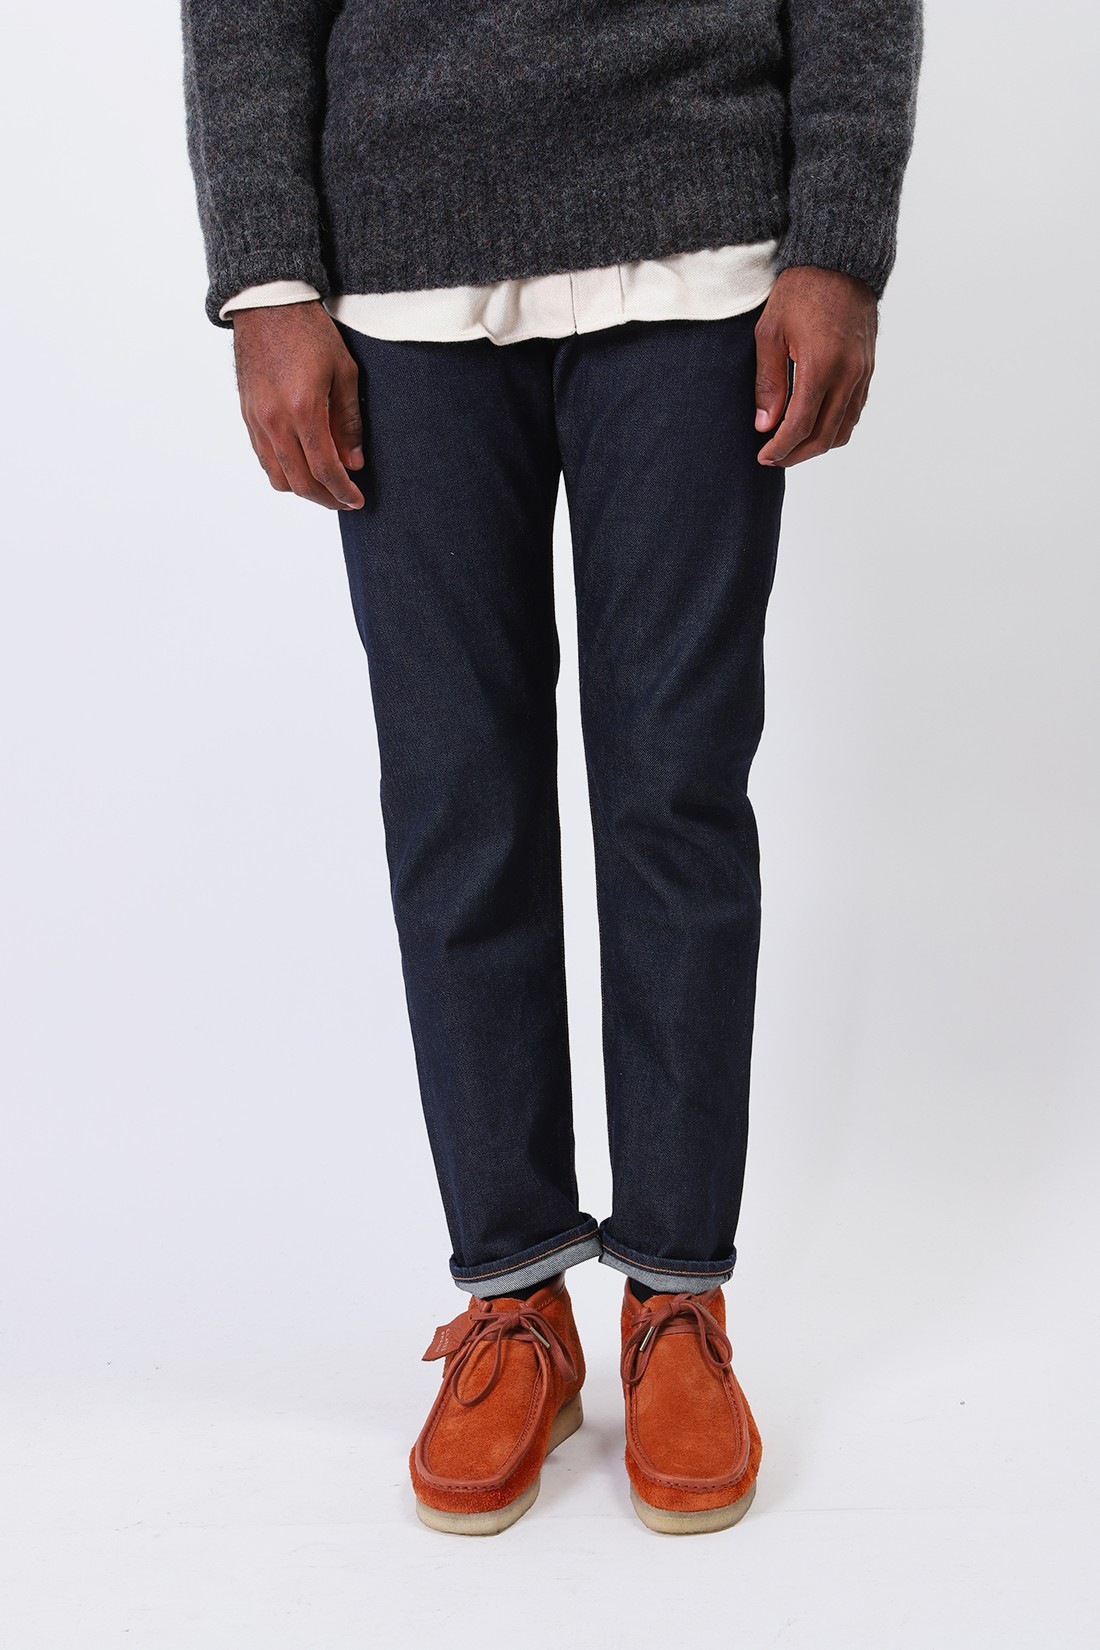 LEVI'S ® MADE AND CRAFTED / Lmc 502 selvedge stretch denim Rinsed